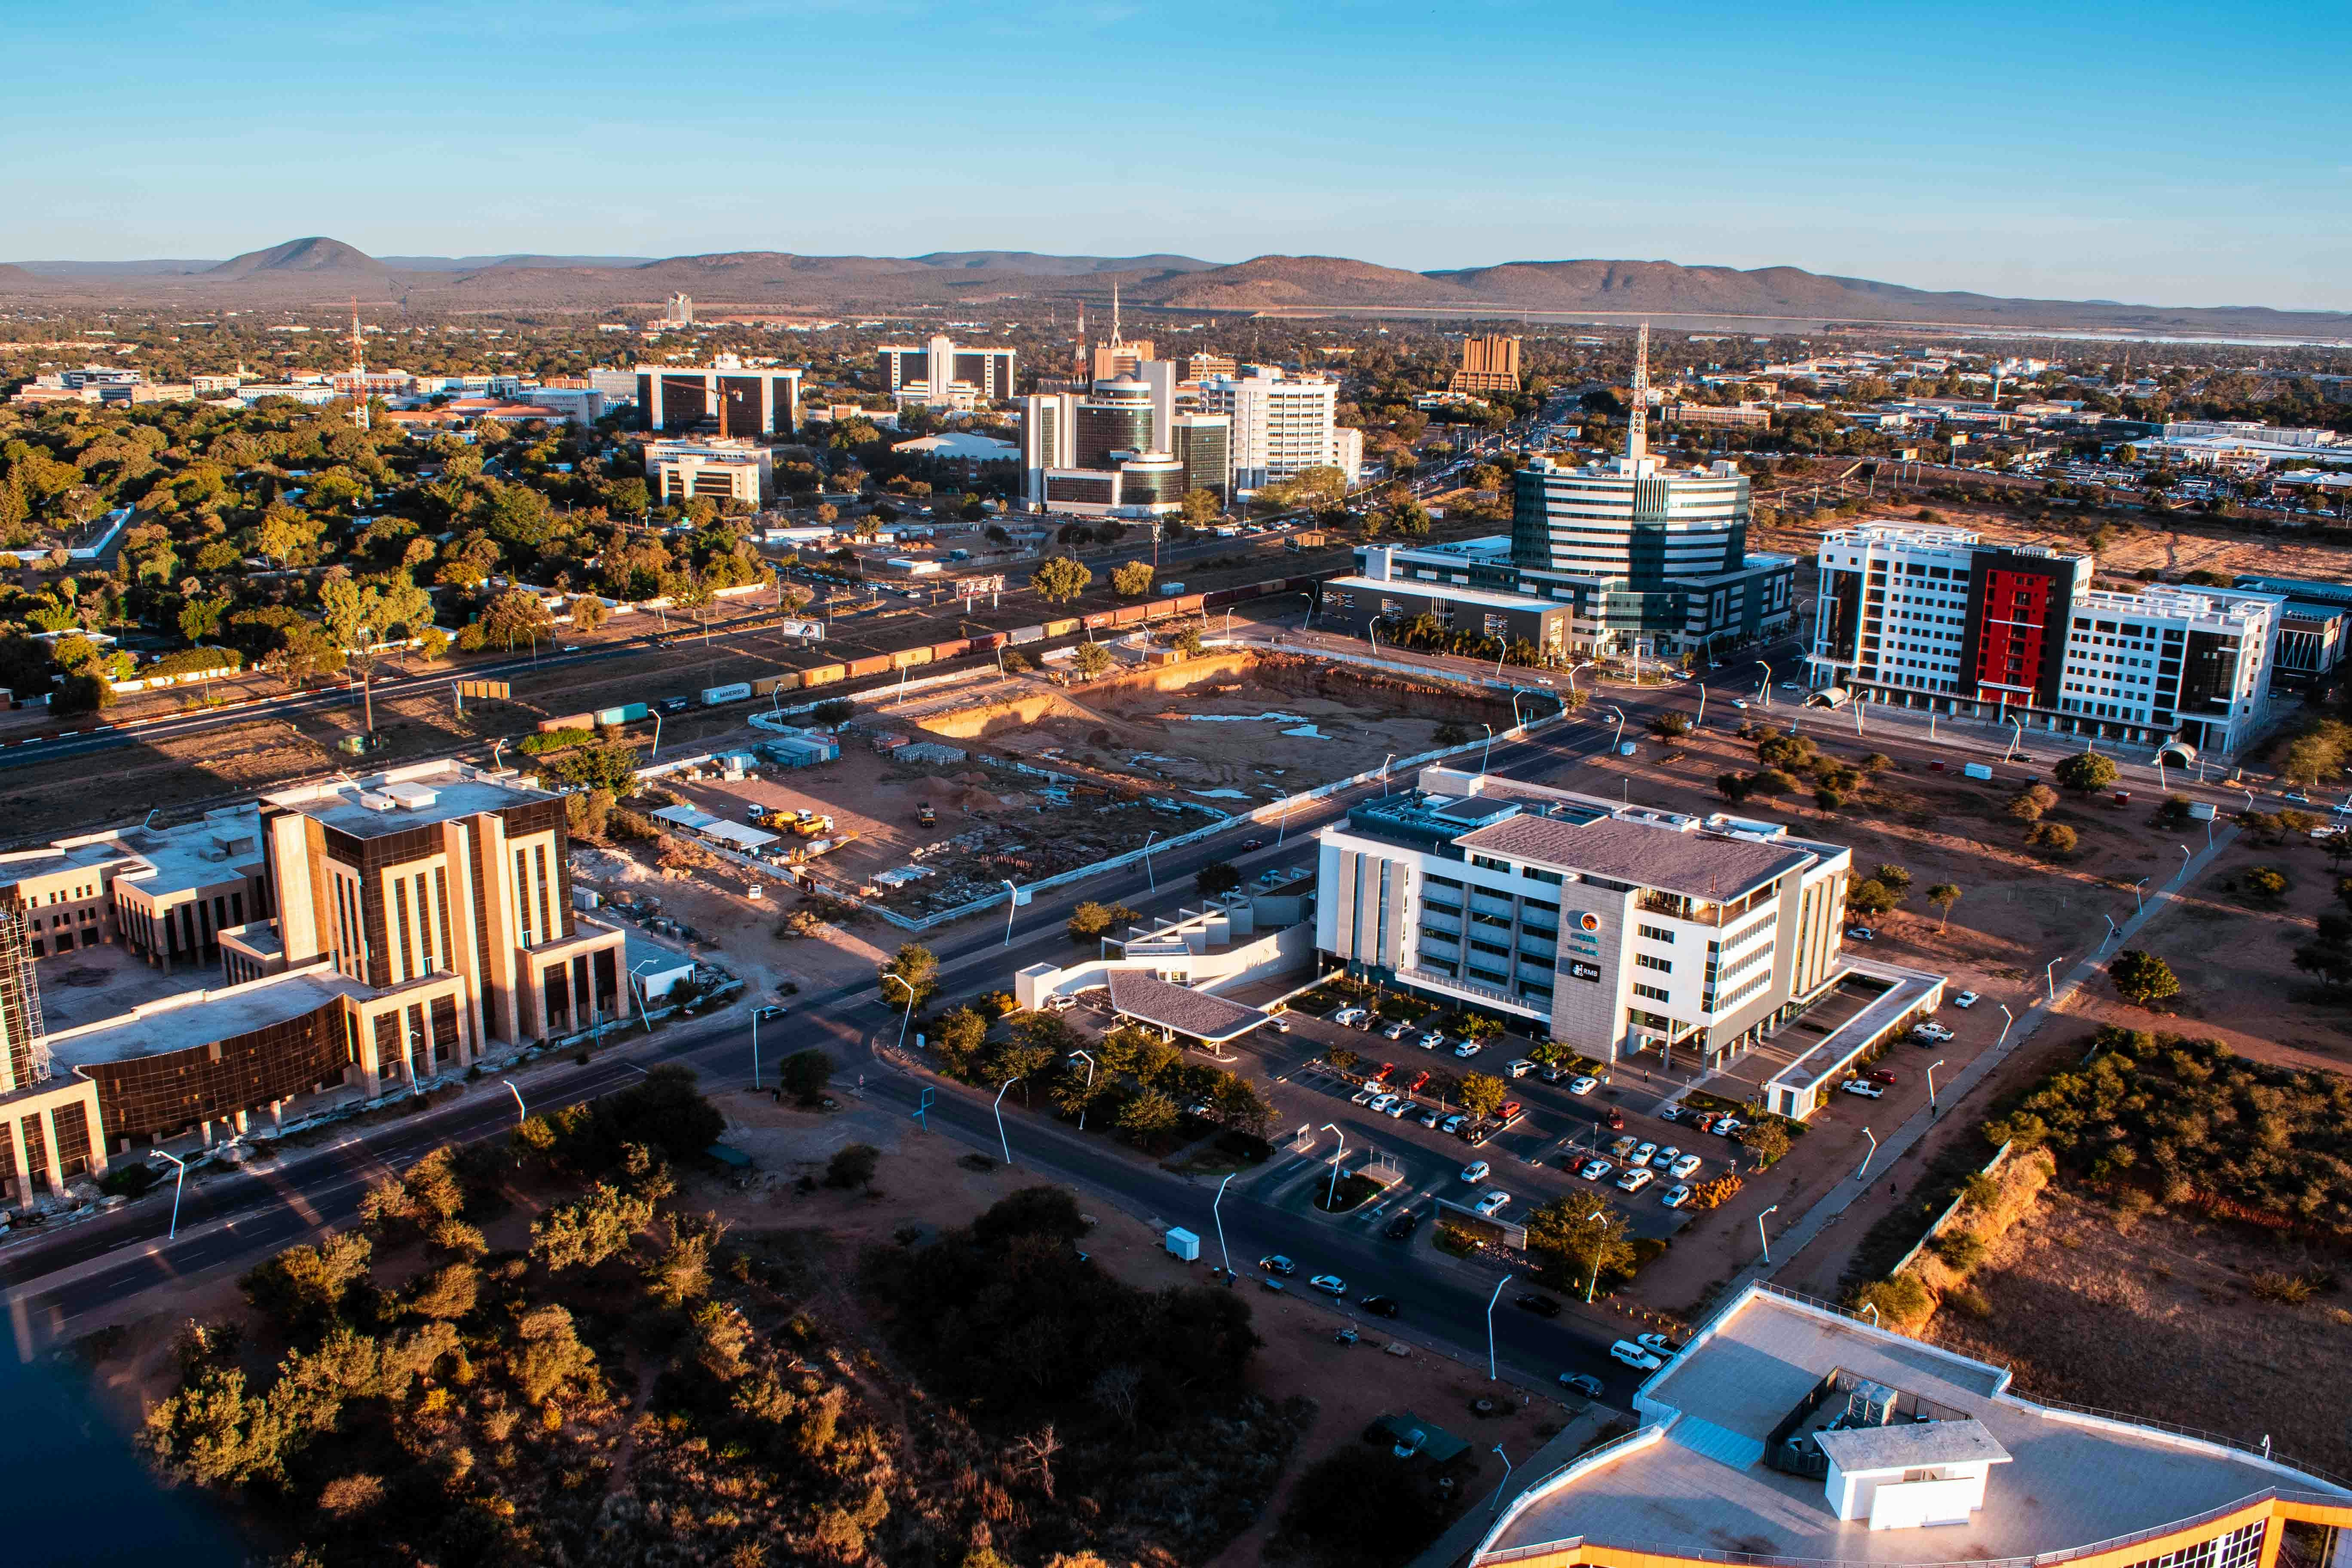 Overview of the Central Business District in Gaborone, the capital city of Botswana.